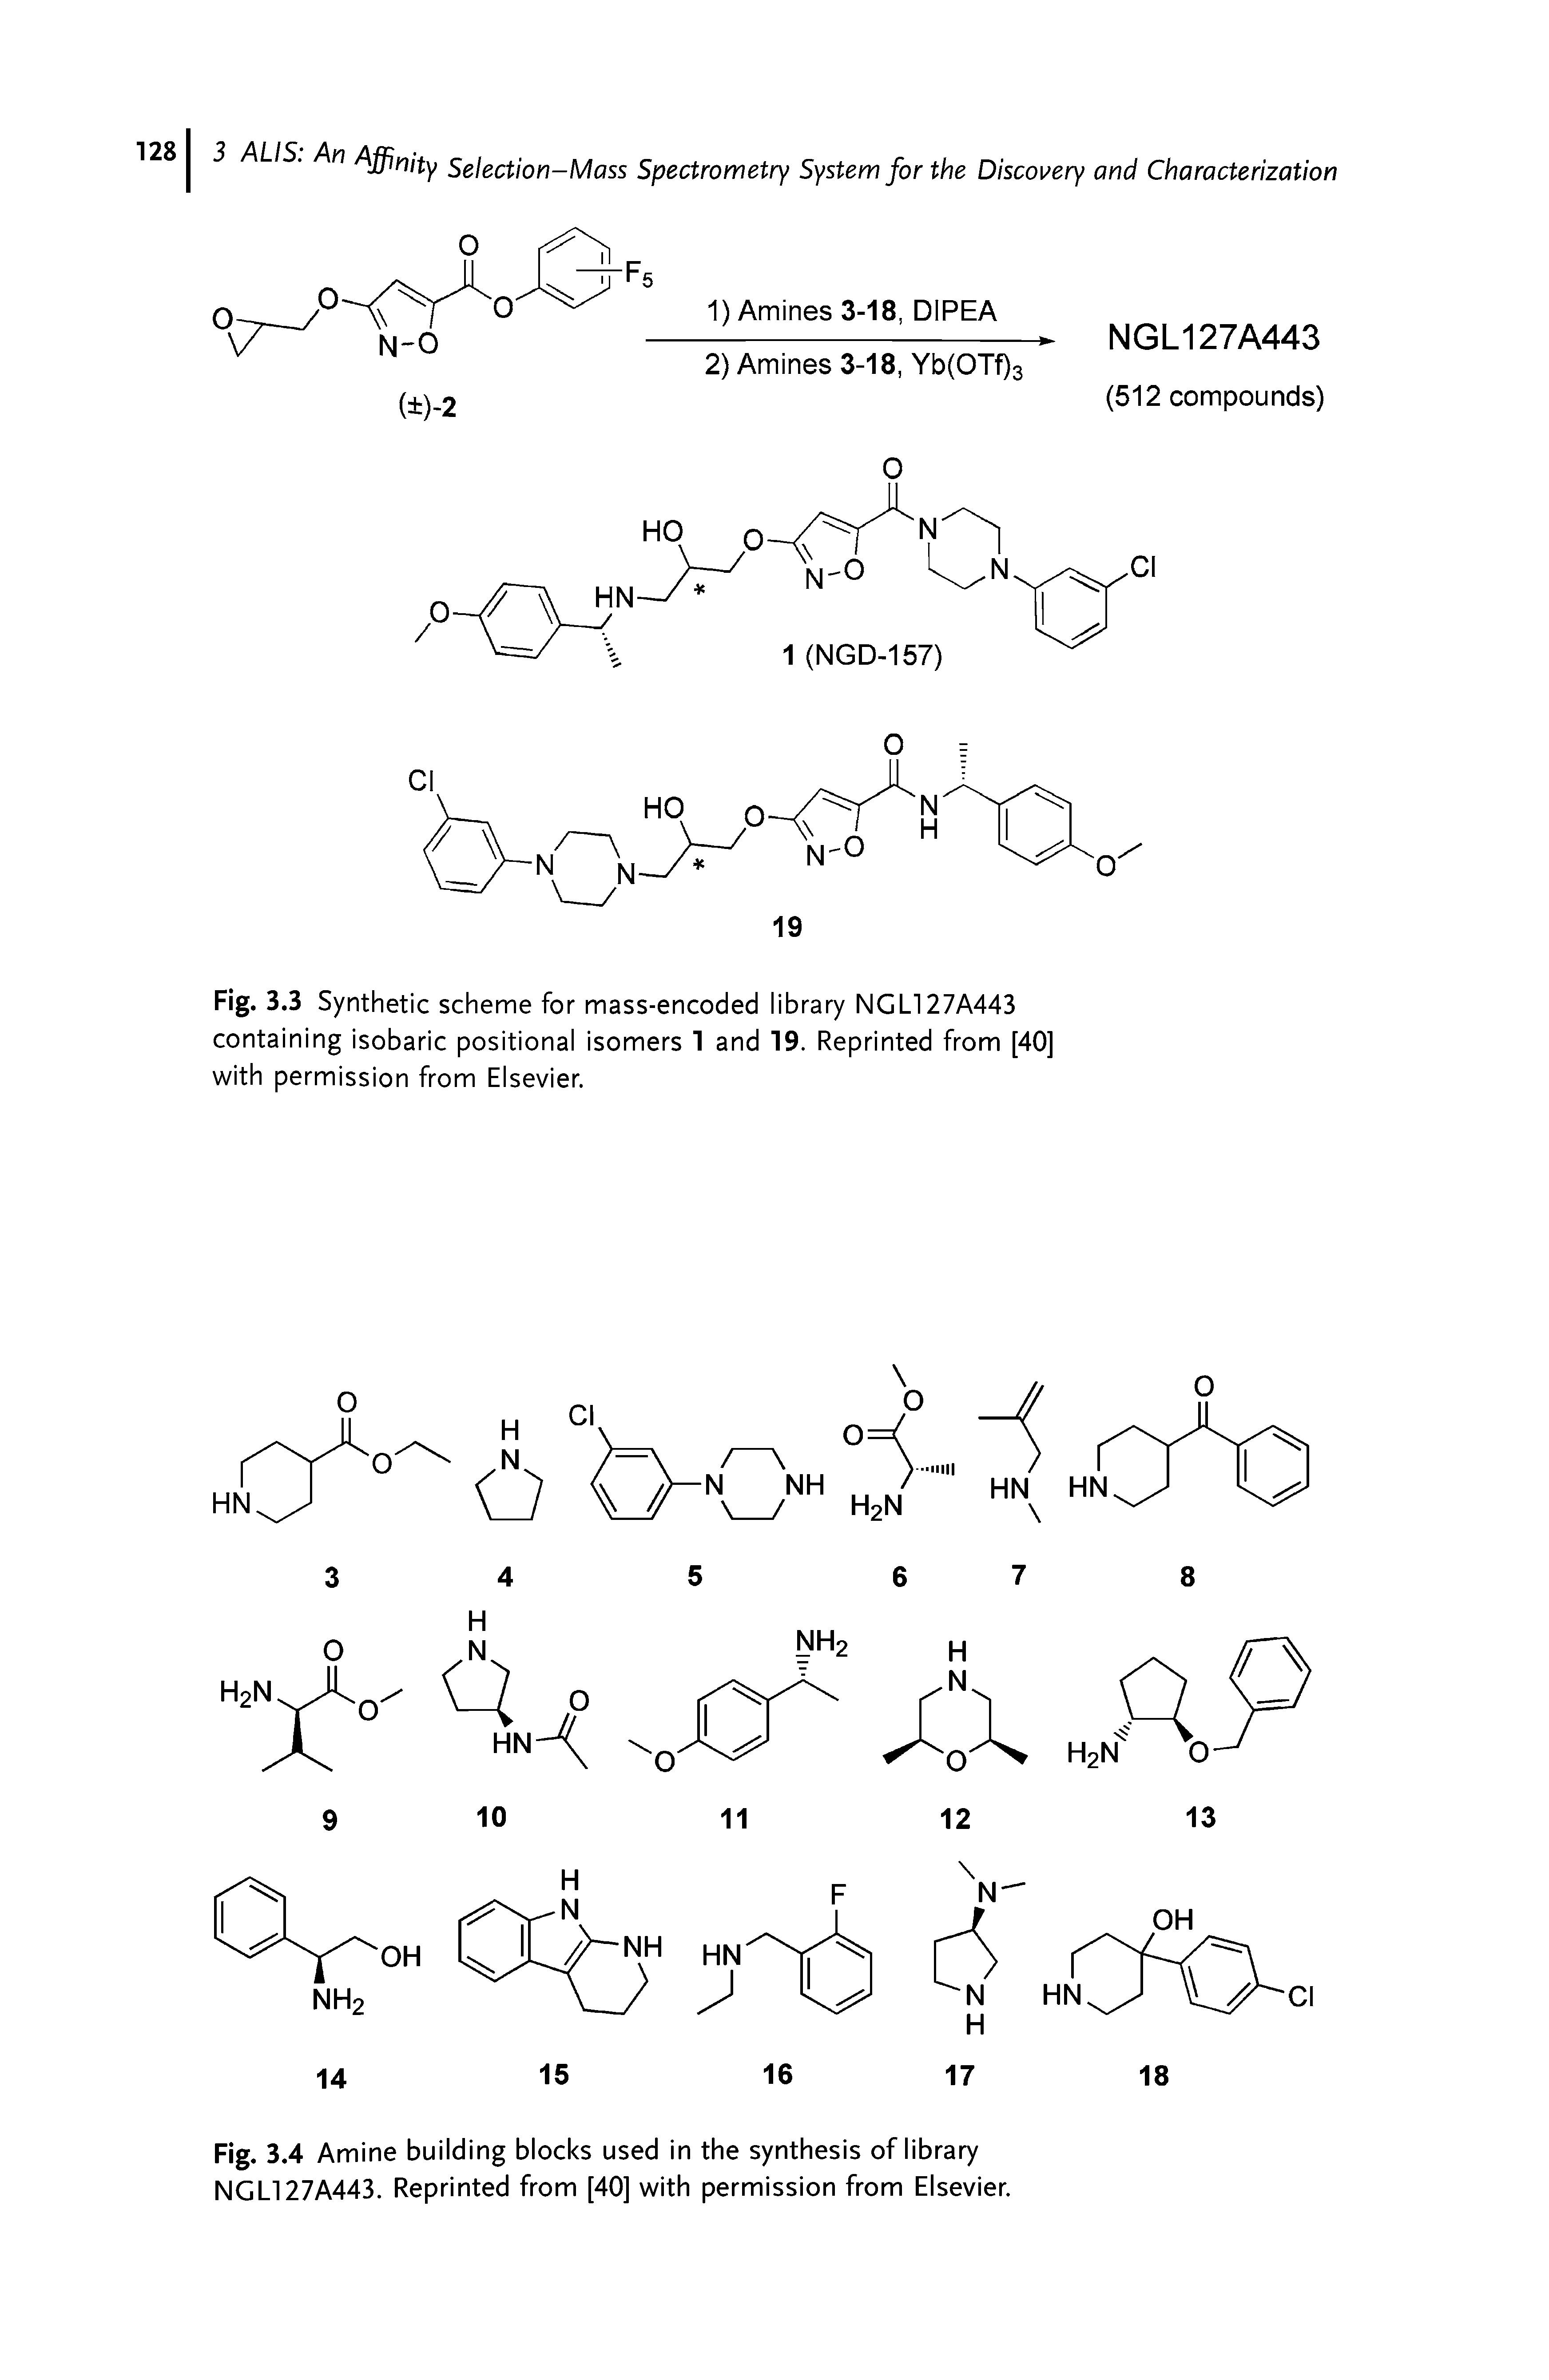 Fig. 3.4 Amine building blocks used in the synthesis of library NGL127A443. Reprinted from [40] with permission from Elsevier.